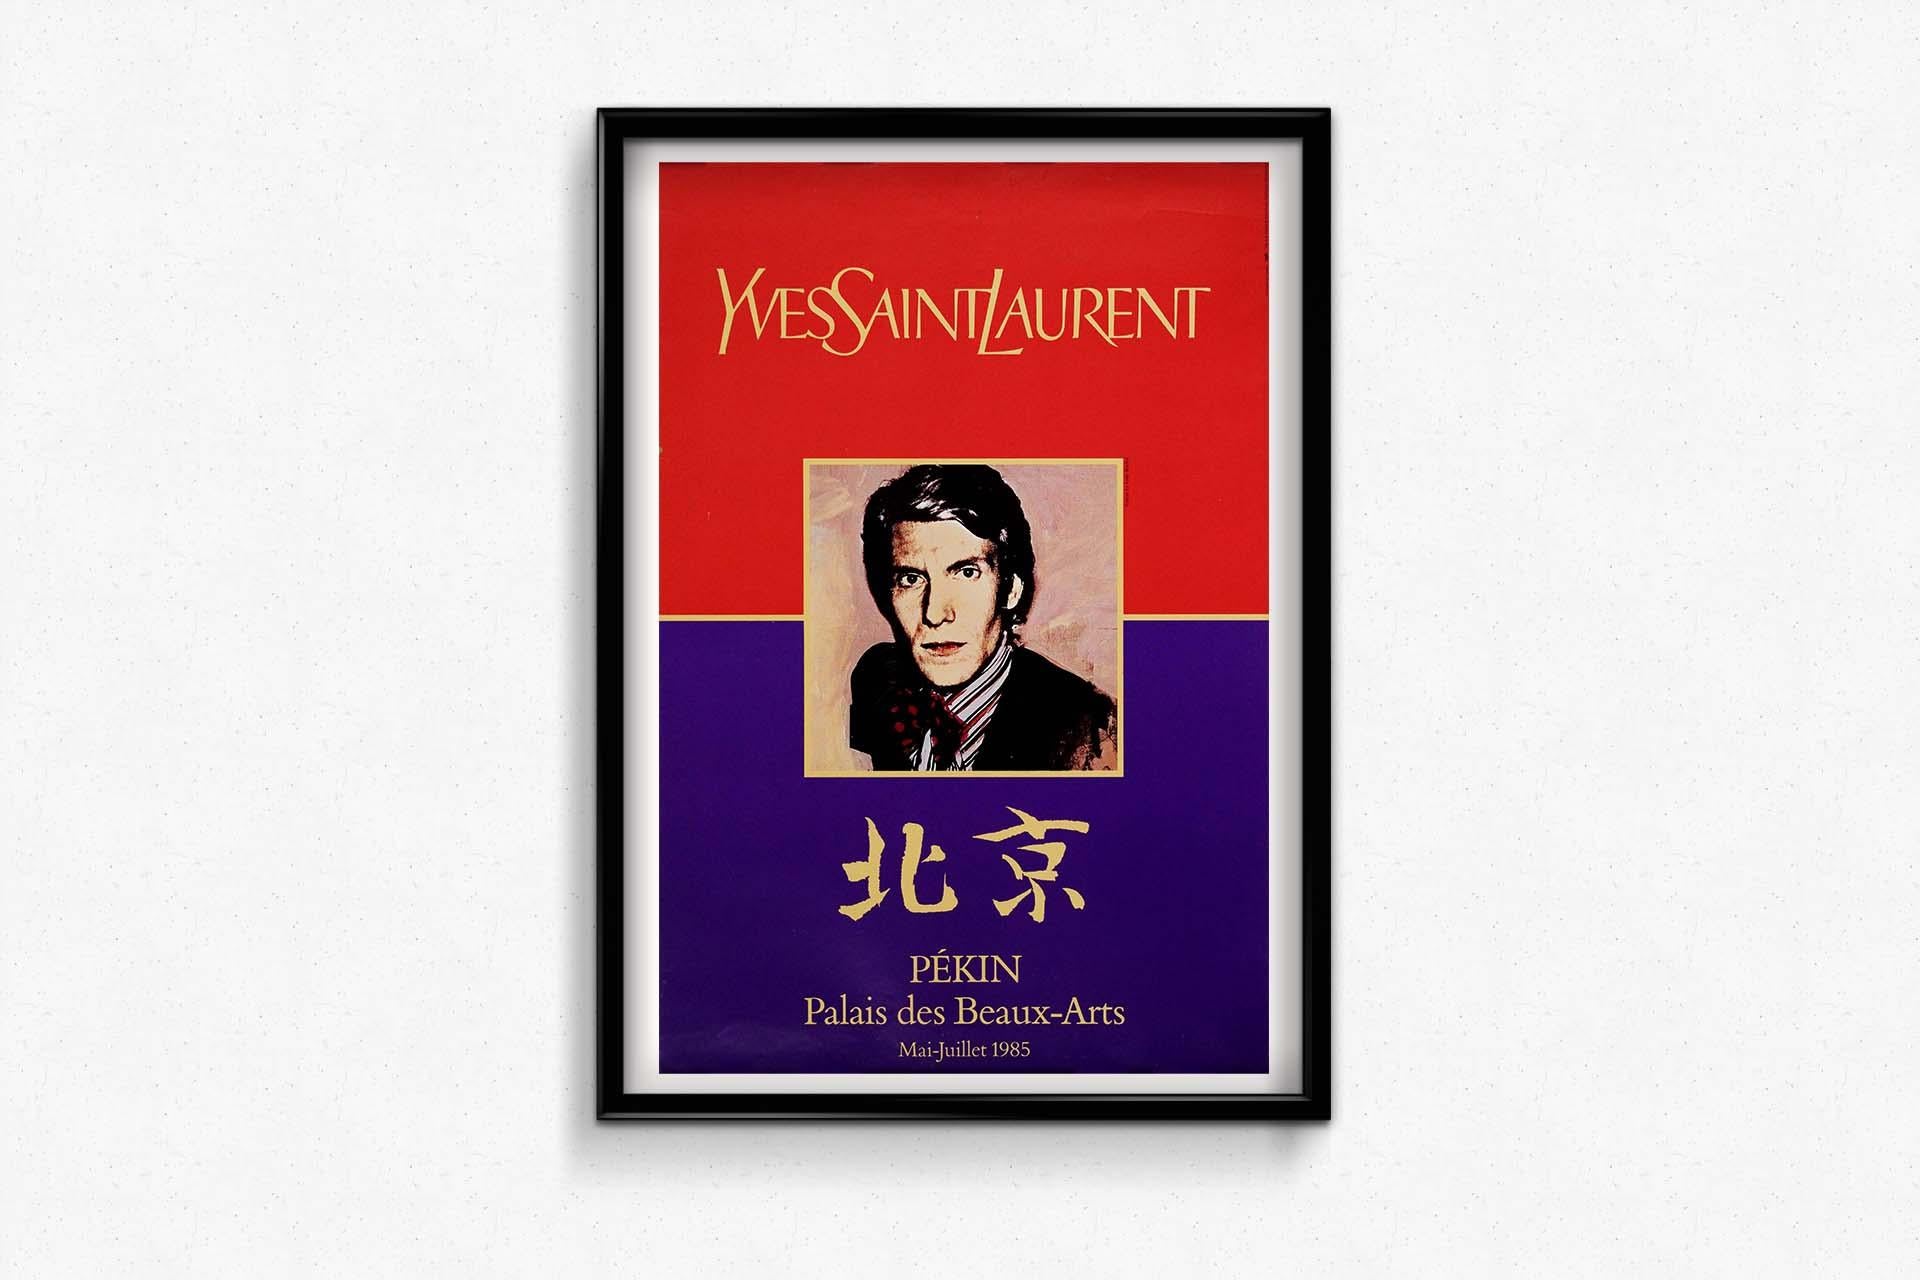 Andy Warhol's original exhibition poster for the 1985 collaboration between Yves Saint Laurent and Pékin Palais des Beaux-Arts embodies a remarkable convergence of fashion, art, and global cultural exchange. Crafted with Warhol's unmistakable style